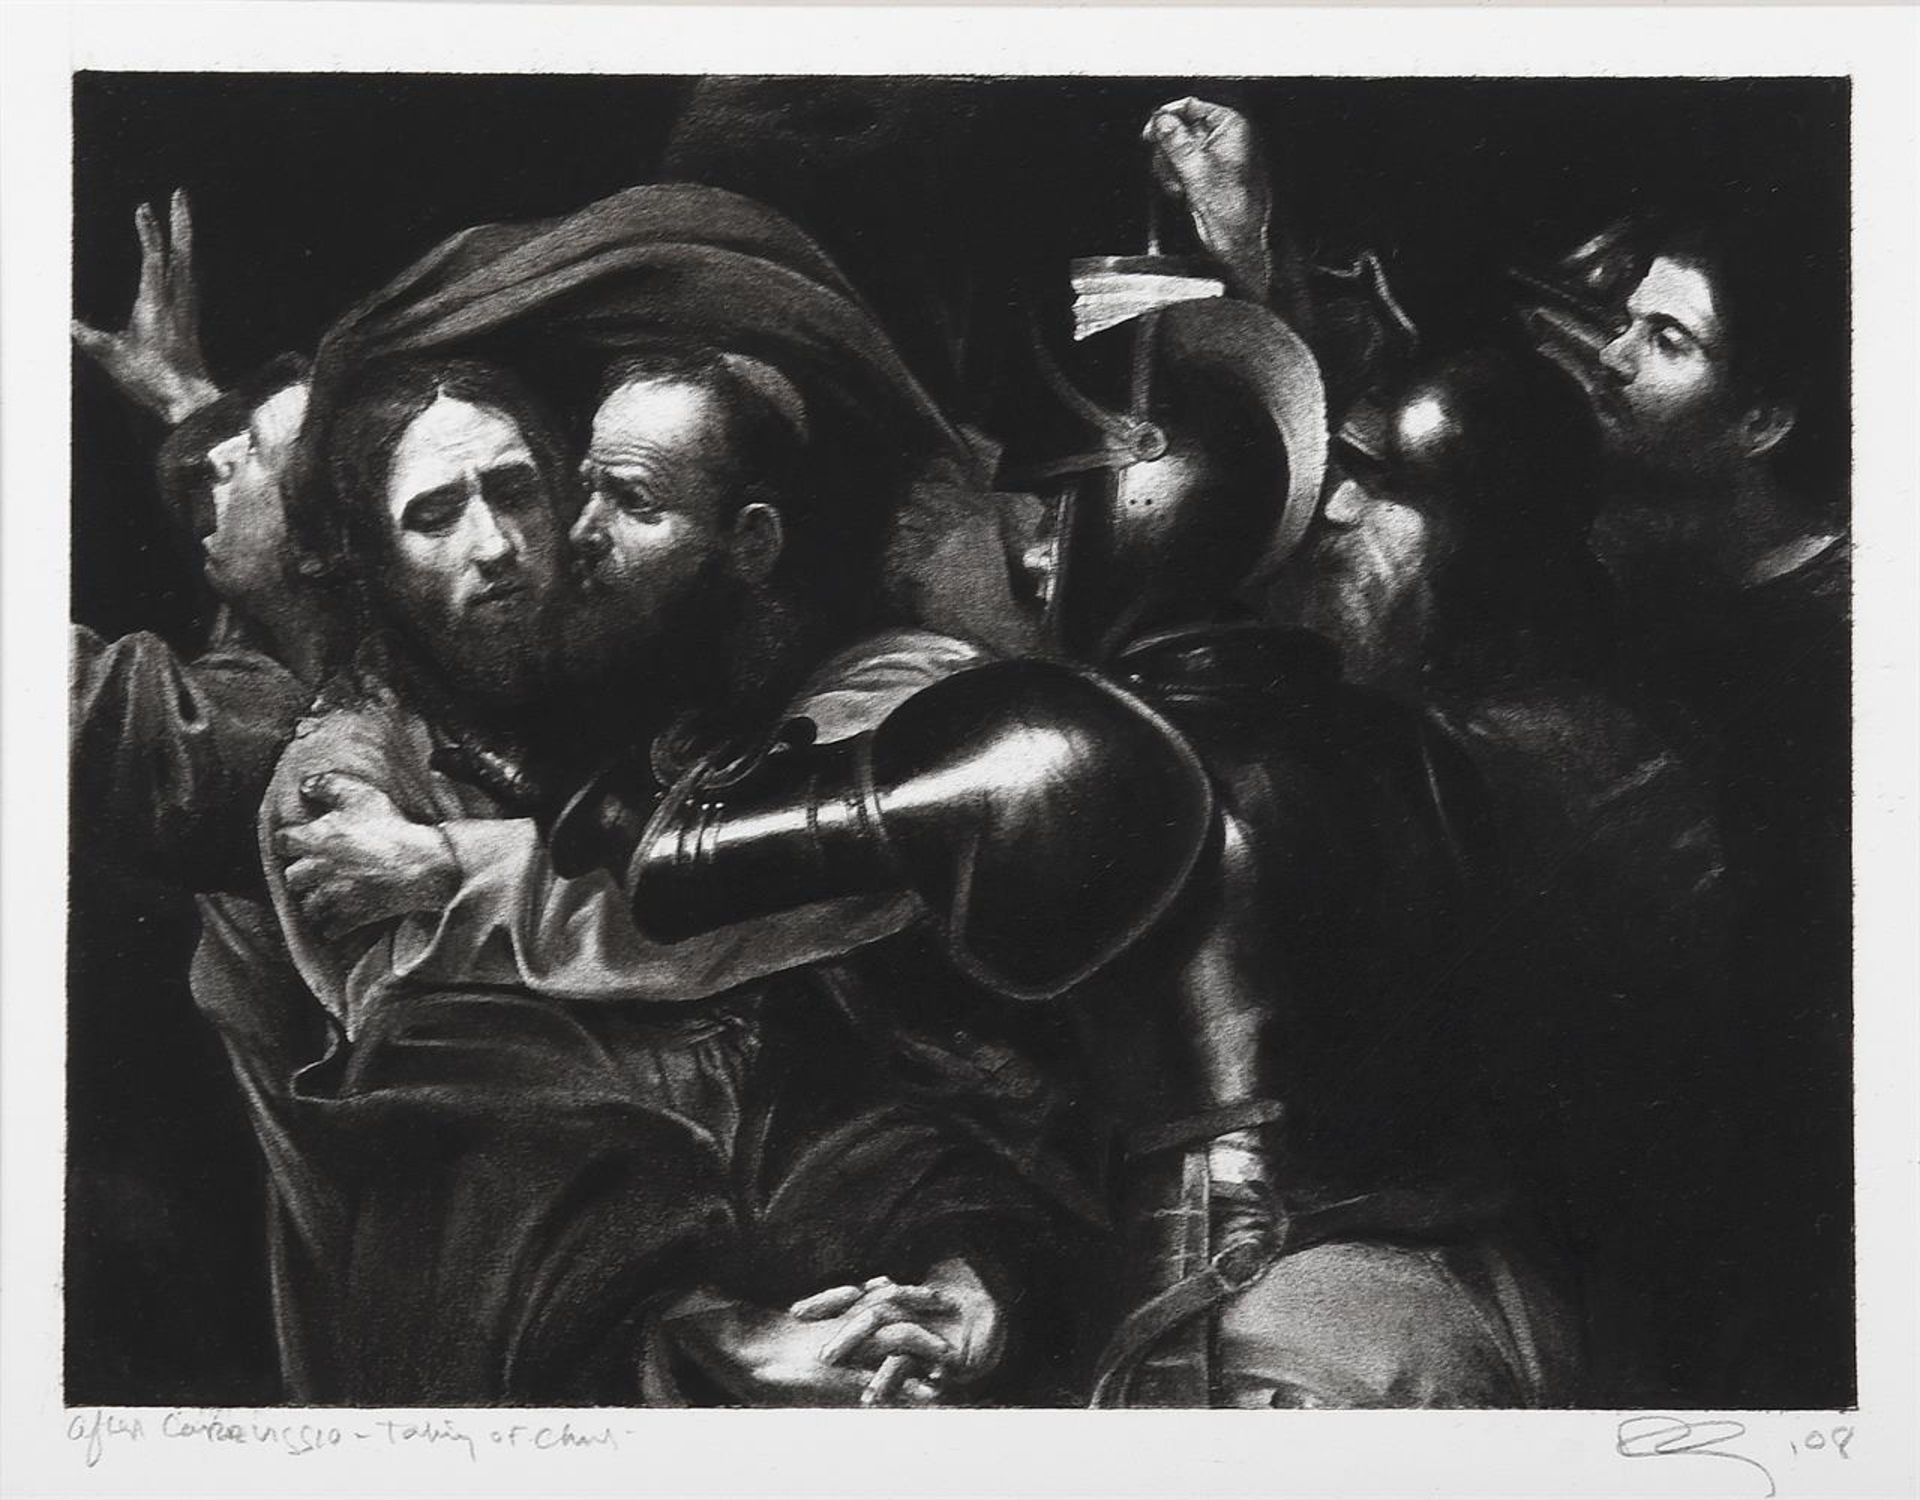 ROBERT LONGO (AMERICAN B. 1953), UNTITLED (AFTER CARAVAGGIO, THE TAKING OF CHRIST, 1602) - Image 2 of 3